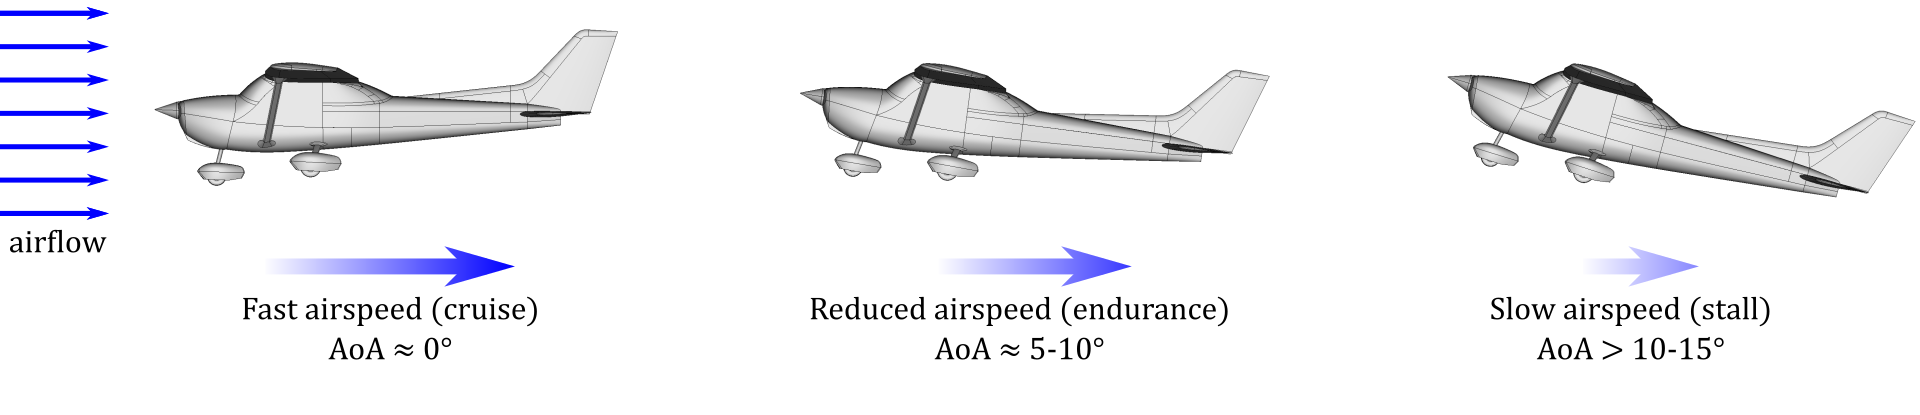 Angle-of-attack (AoA) relative to airspeed